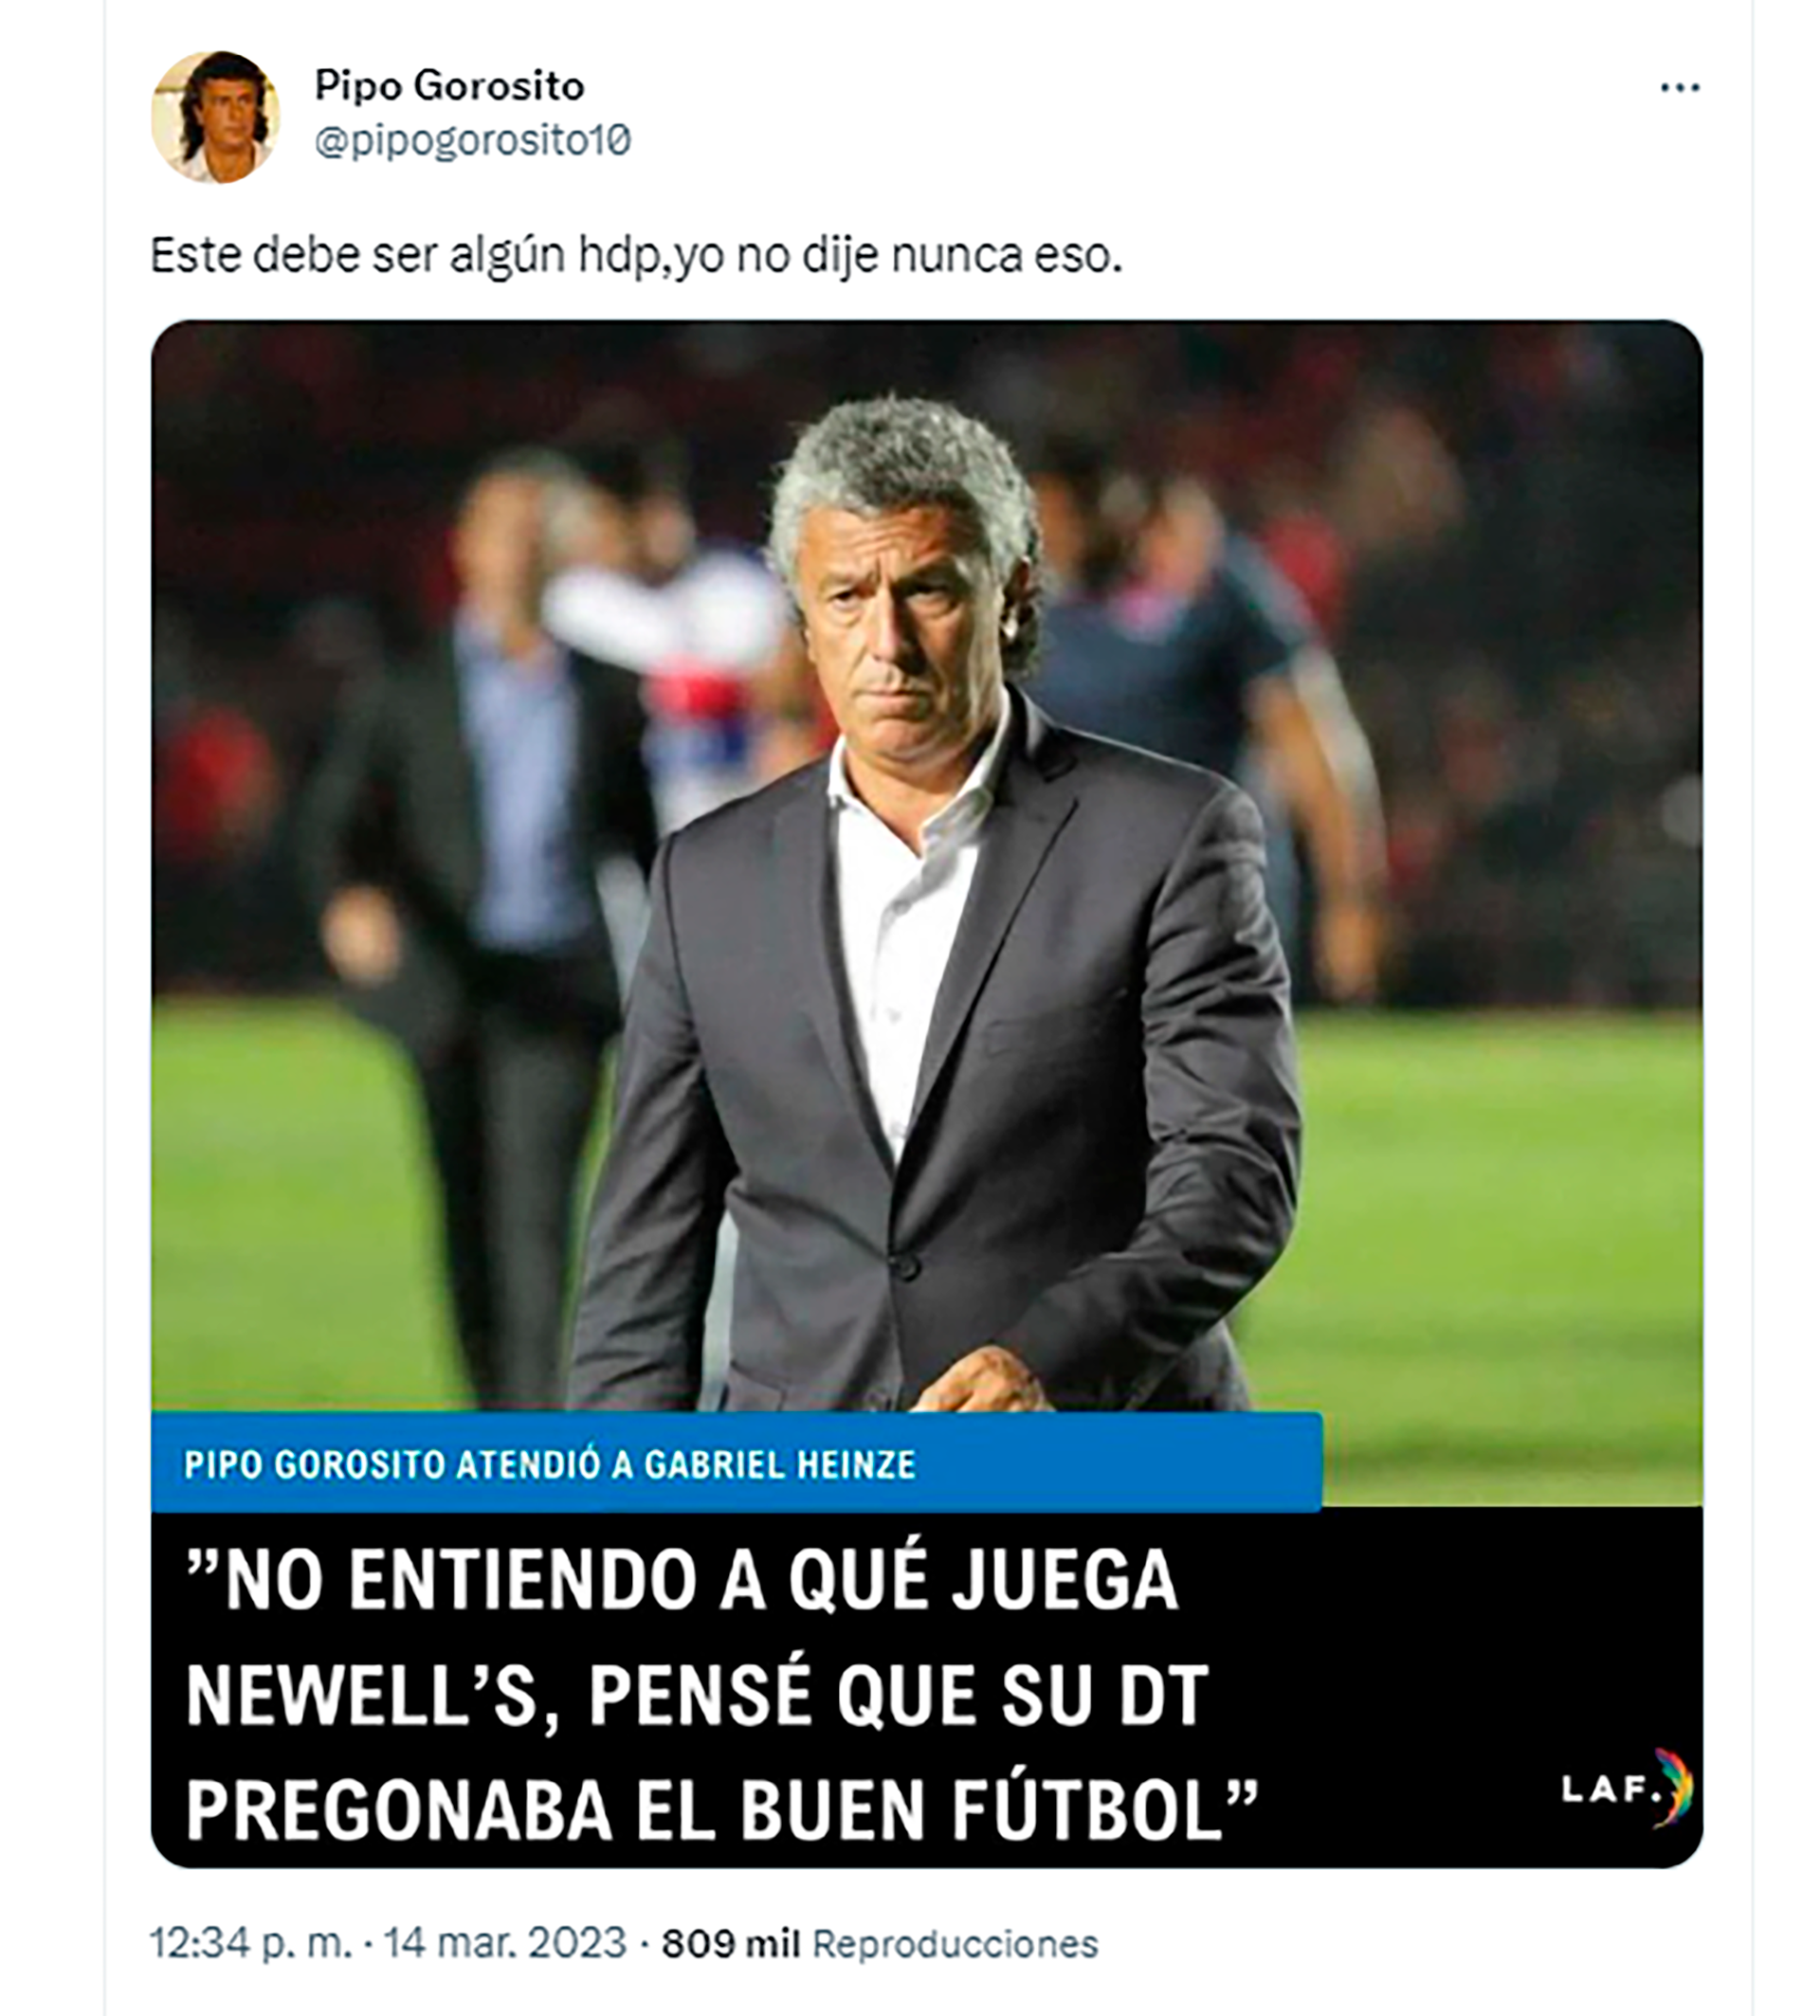 Gorosito cited the fake news and clarified that he had not made that statement